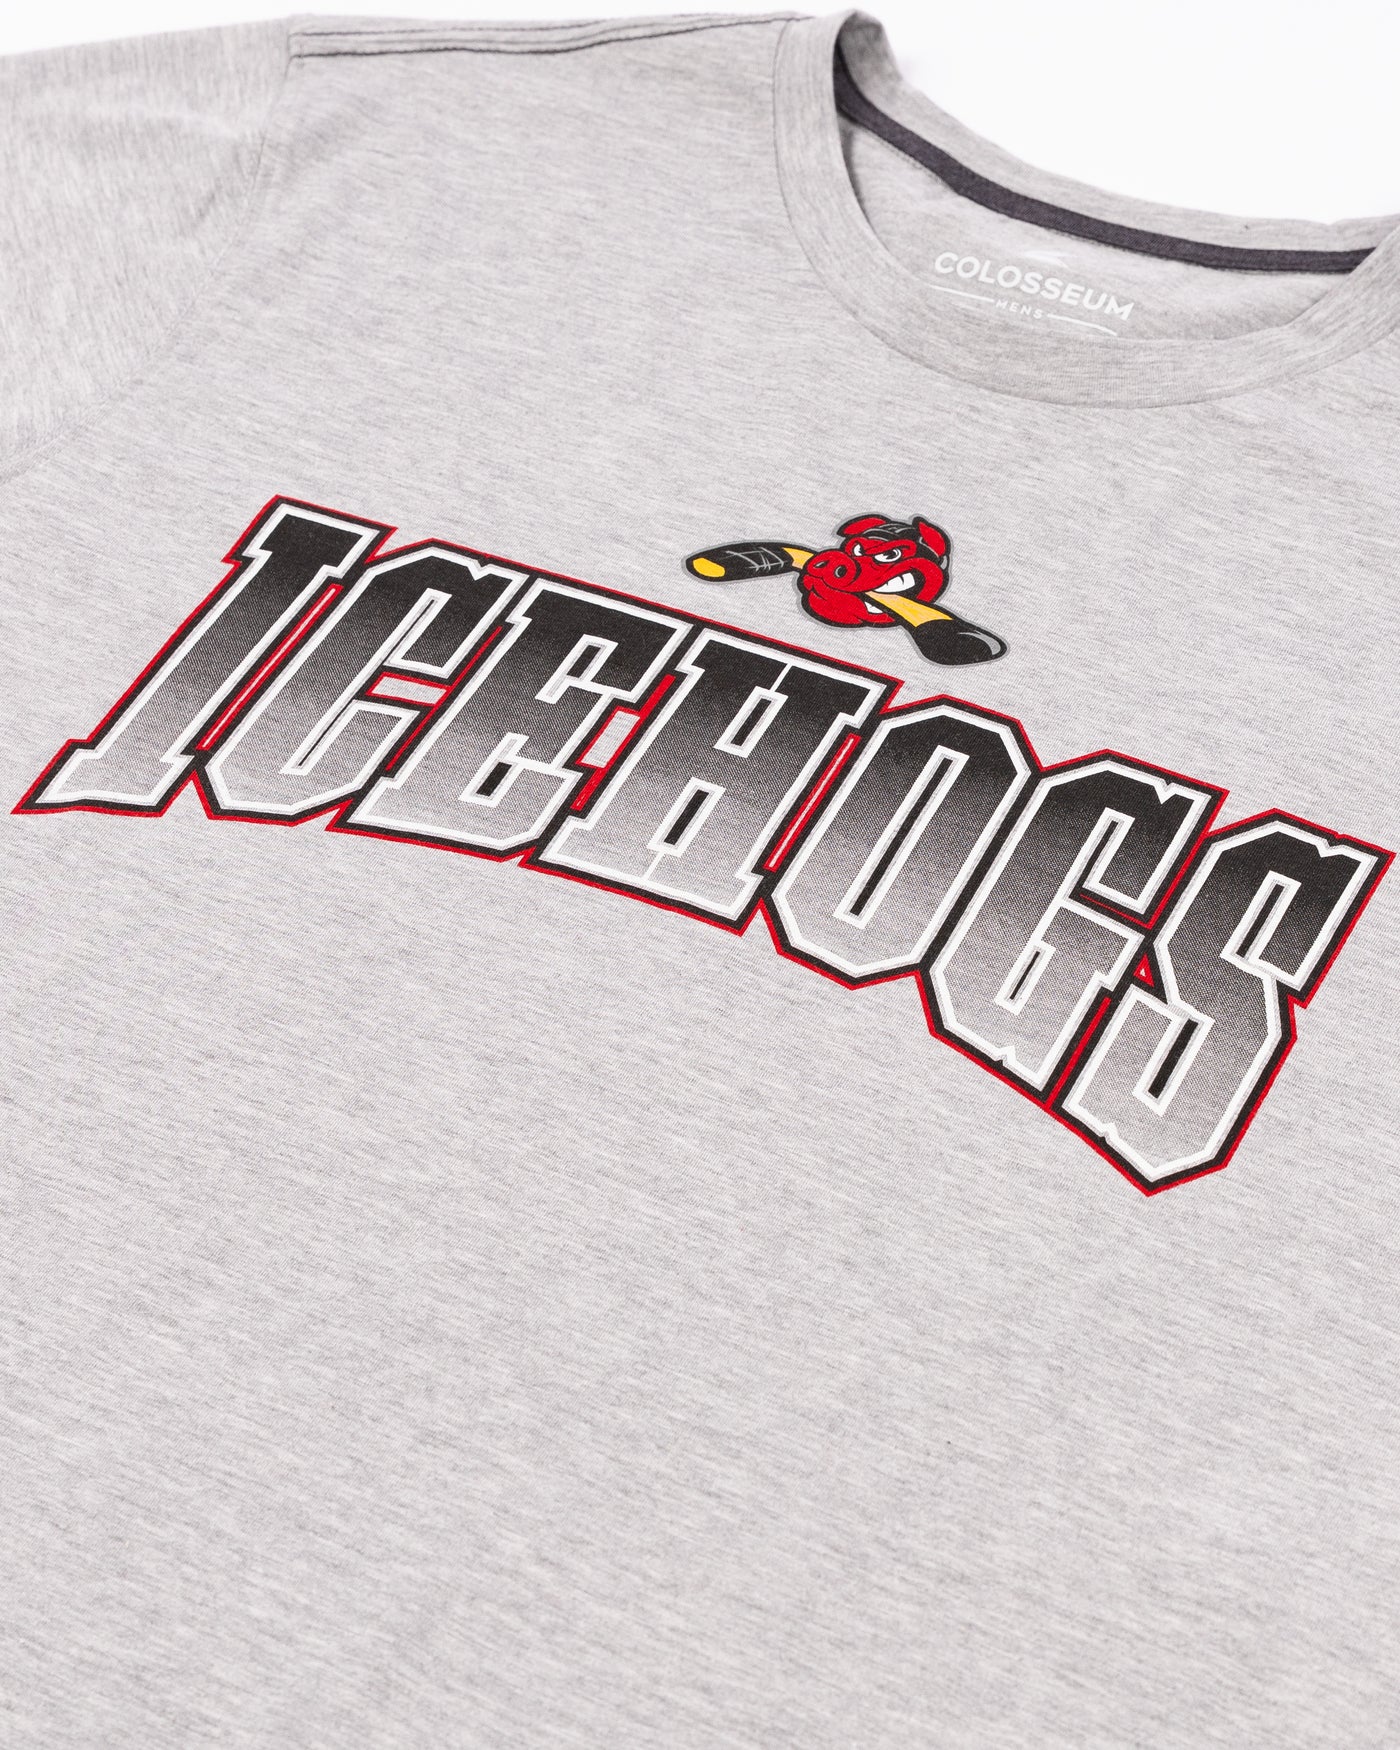 grey Colosseum tee with Rockford IceHogs wordmark and Hammy logo across chest - detail lay flat